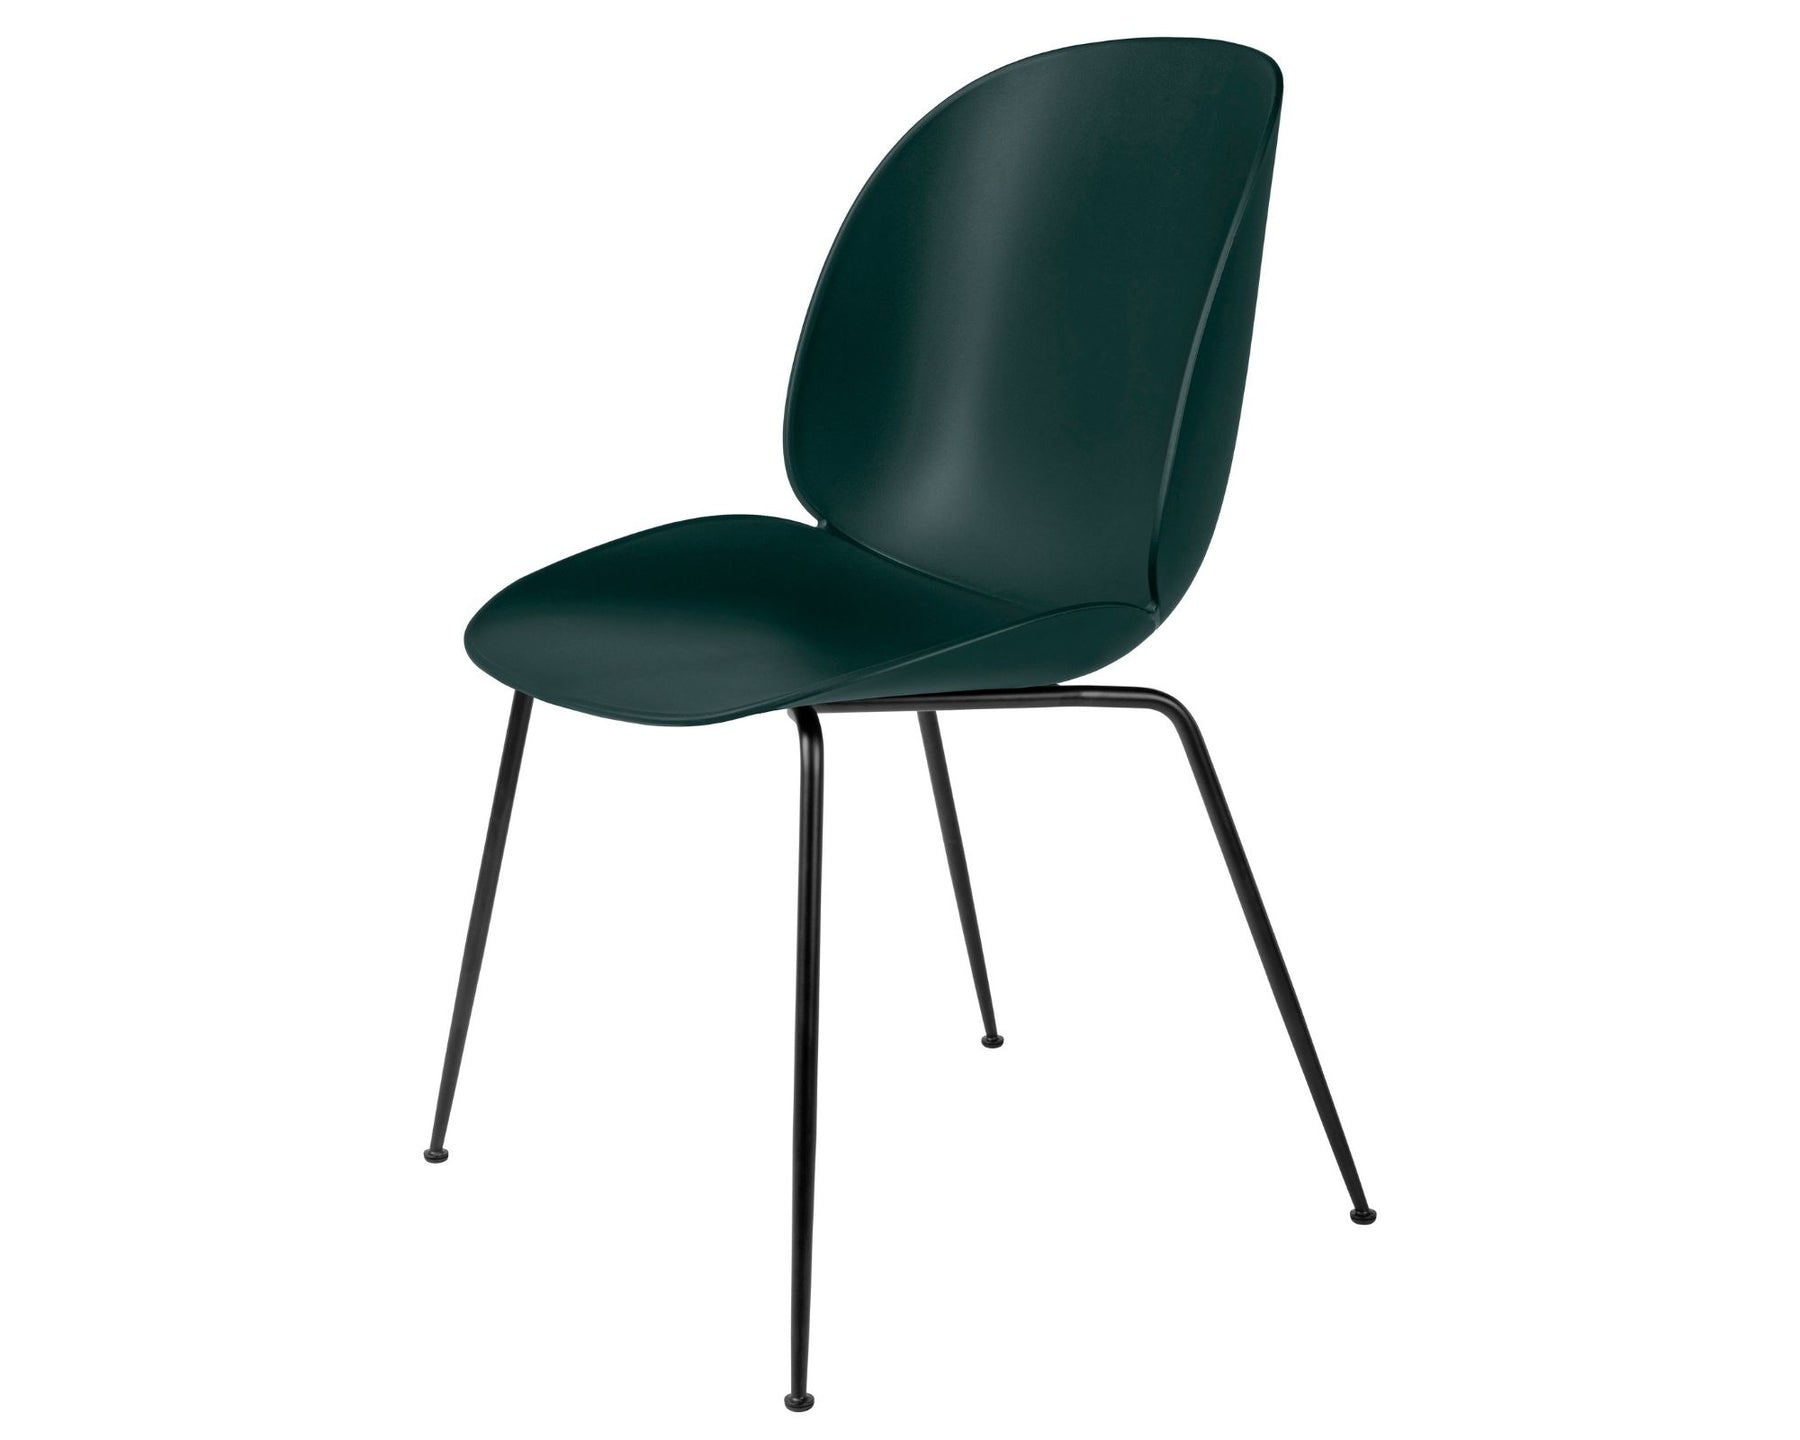 Dark Green Dining Chair with Black Base | DSHOP